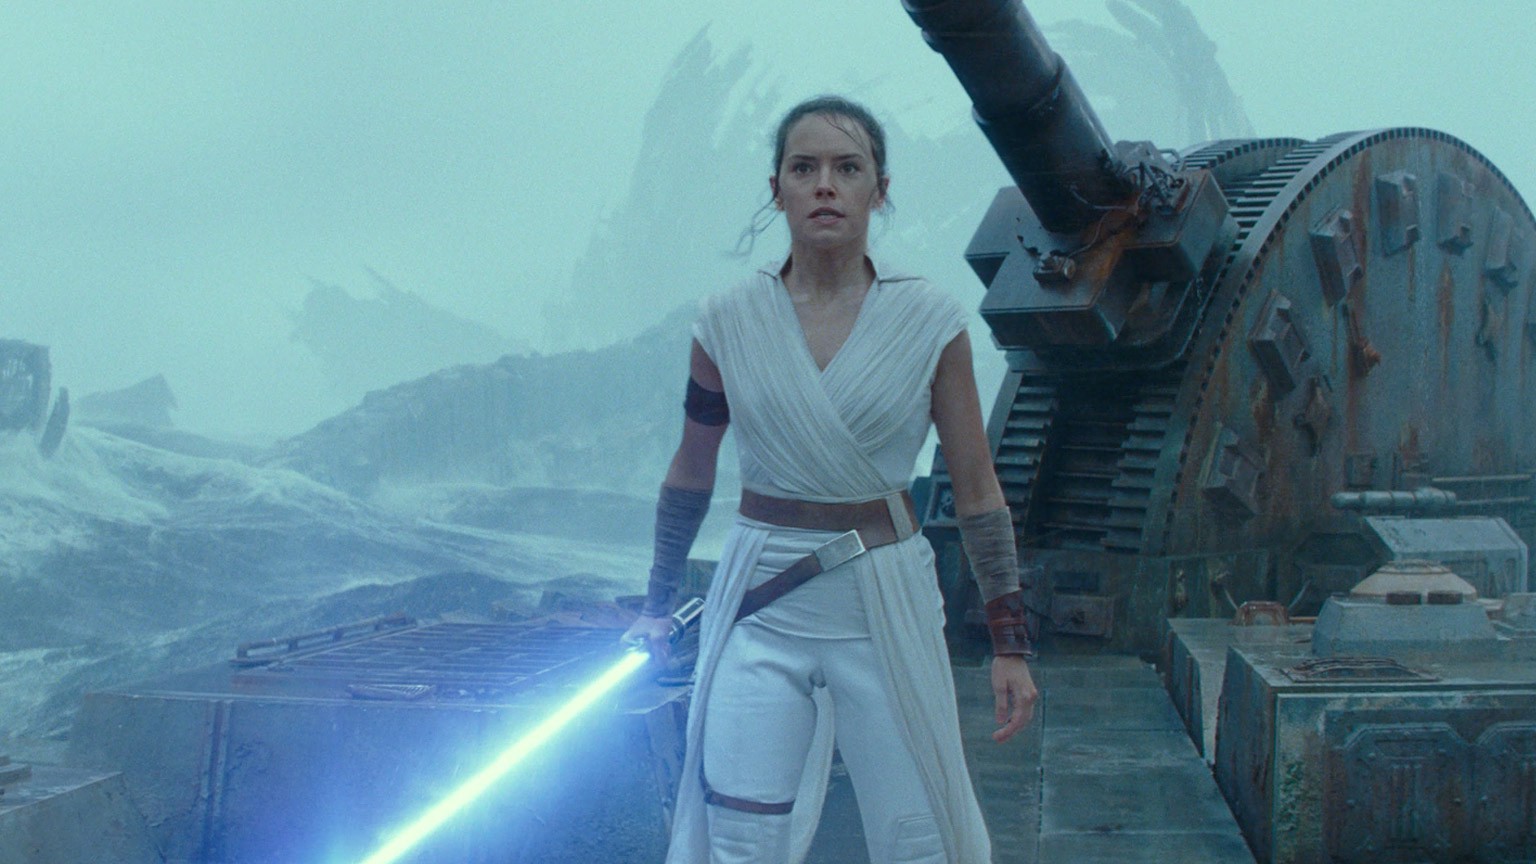 Jon Favreau hints that the post-Star Wars sequel trilogy period is being developed.